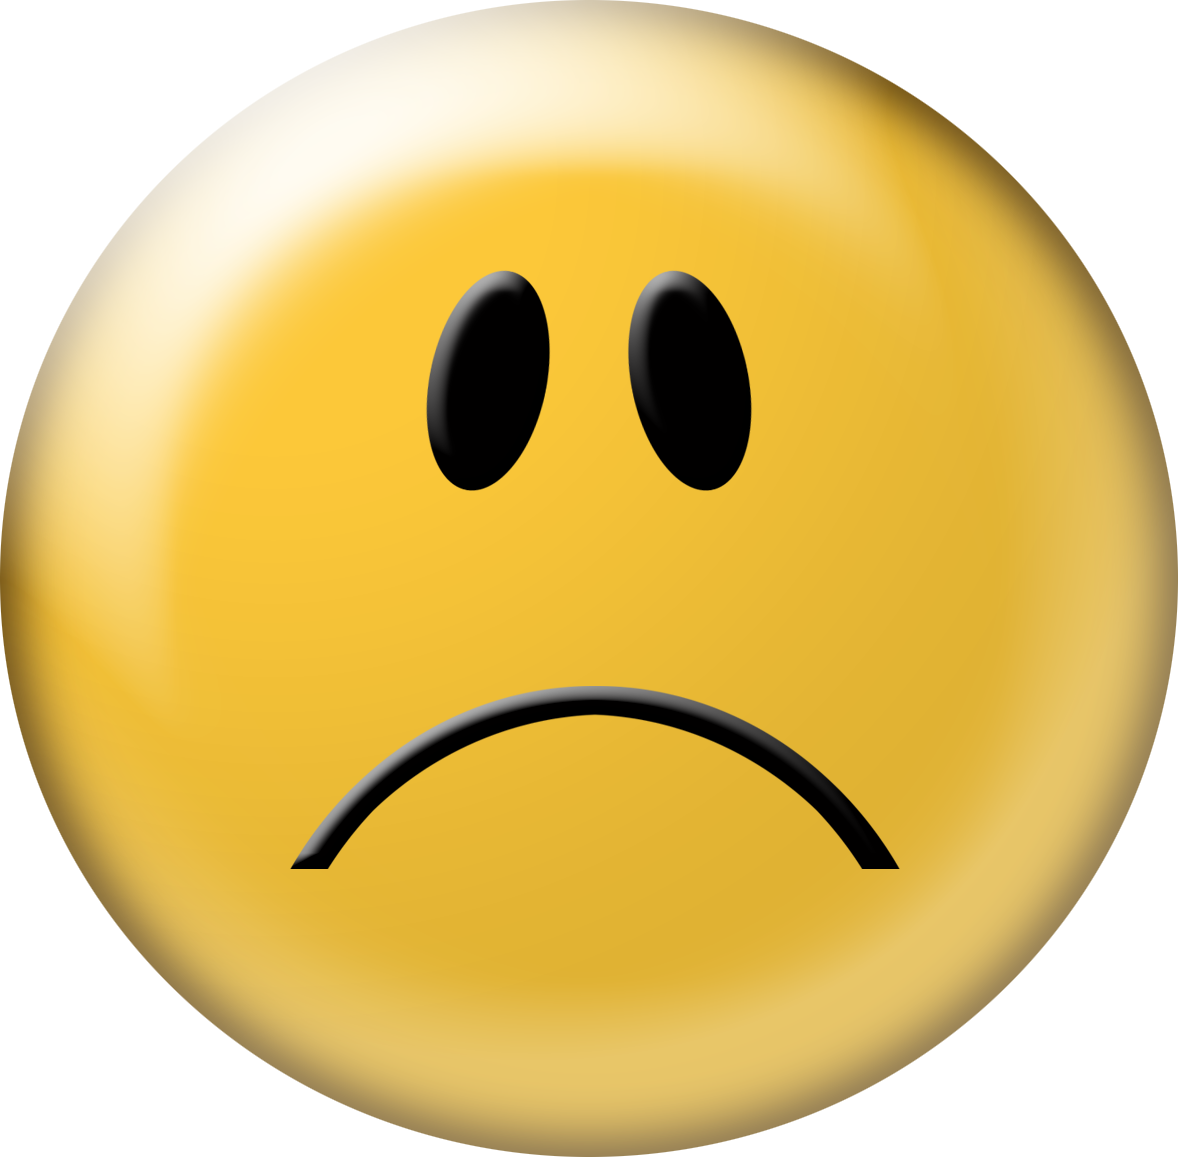 Frowning Smiley Face - Angry Face Emoji Png - (1178x1157) Png Clipart Downl...